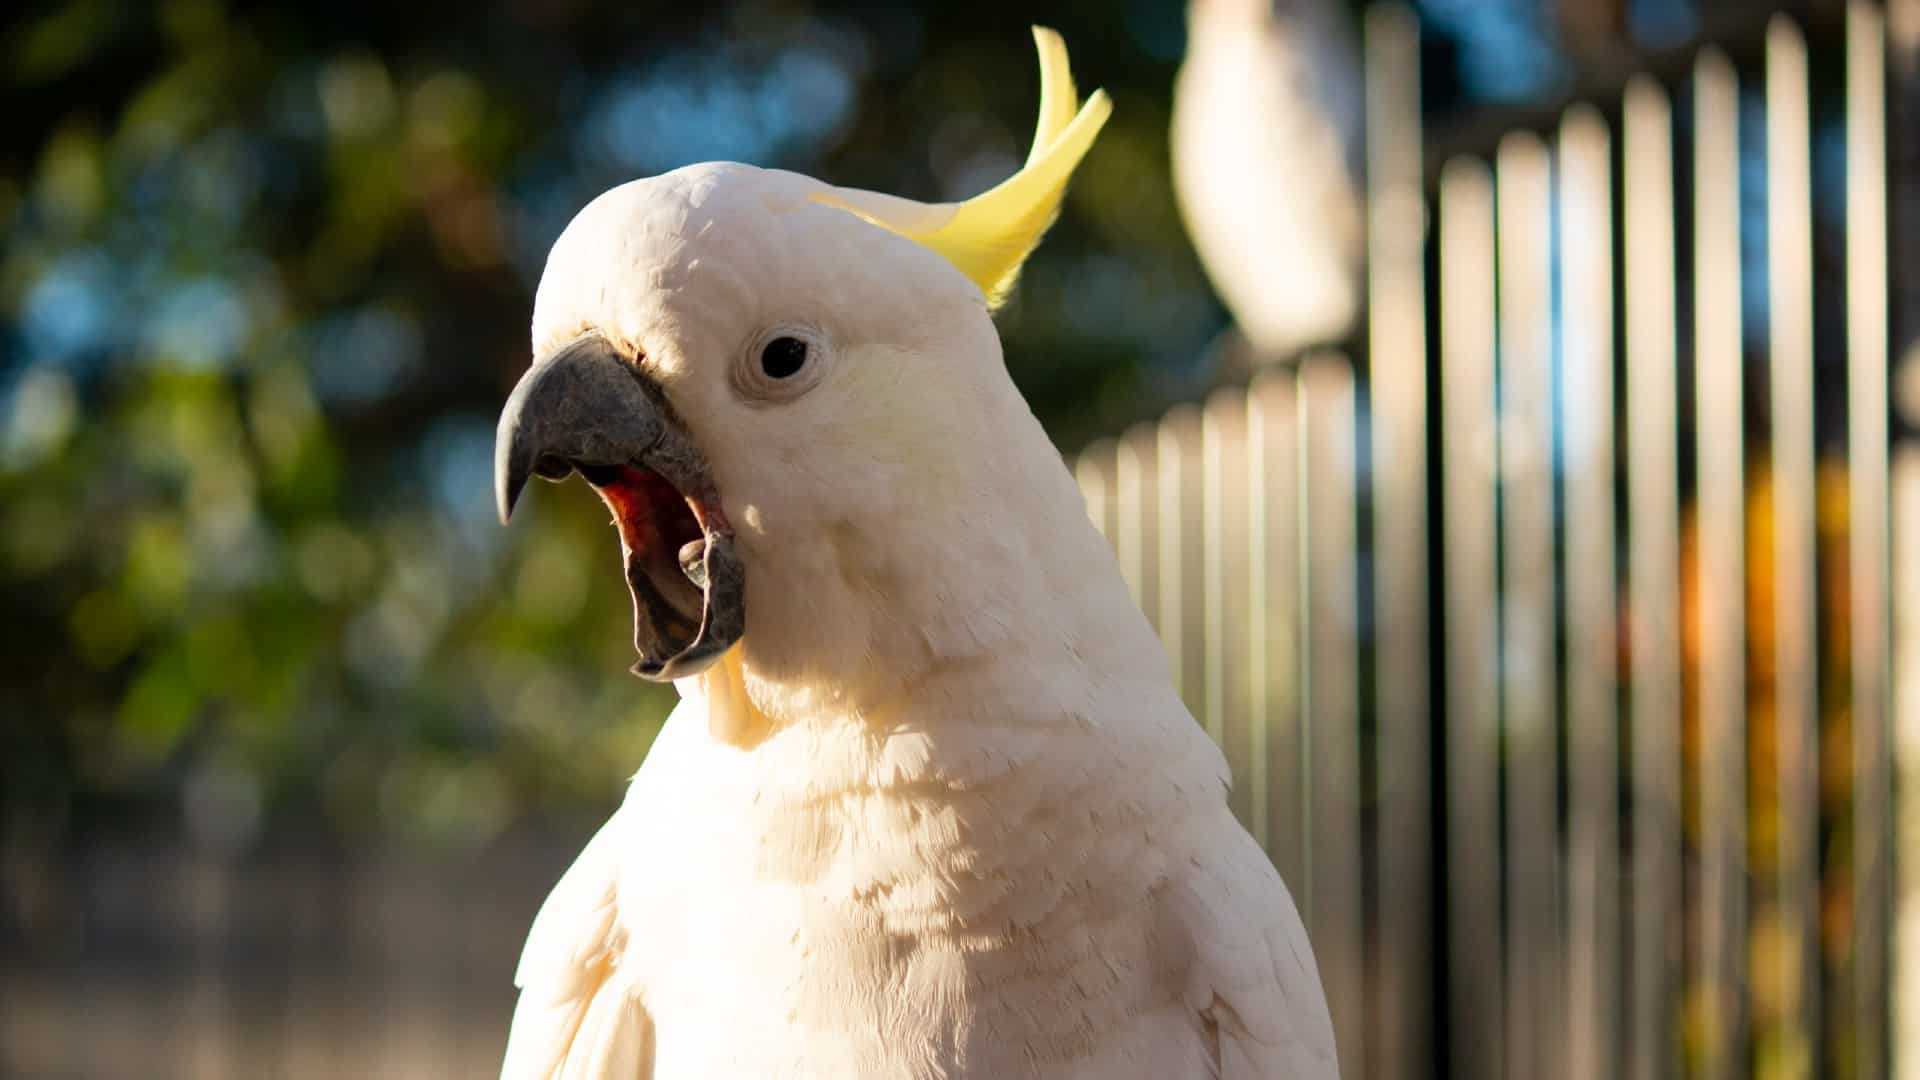 a cockatoo opens its mouth widely as though it is squawking as it looks sideways at the camera.